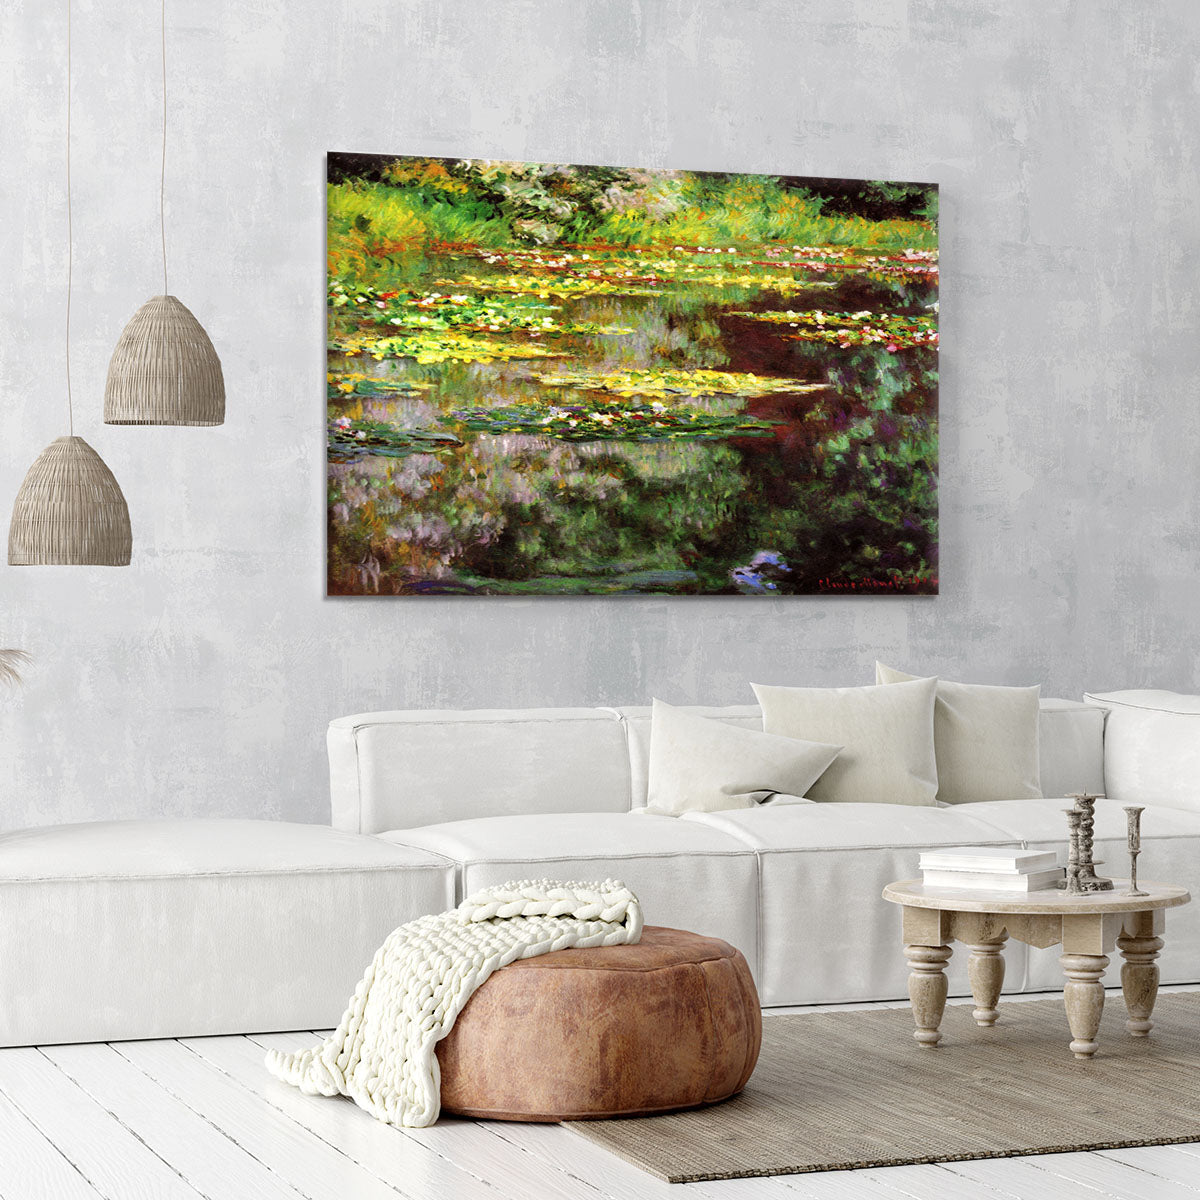 Sea rose pond by Monet Canvas Print or Poster - Canvas Art Rocks - 6